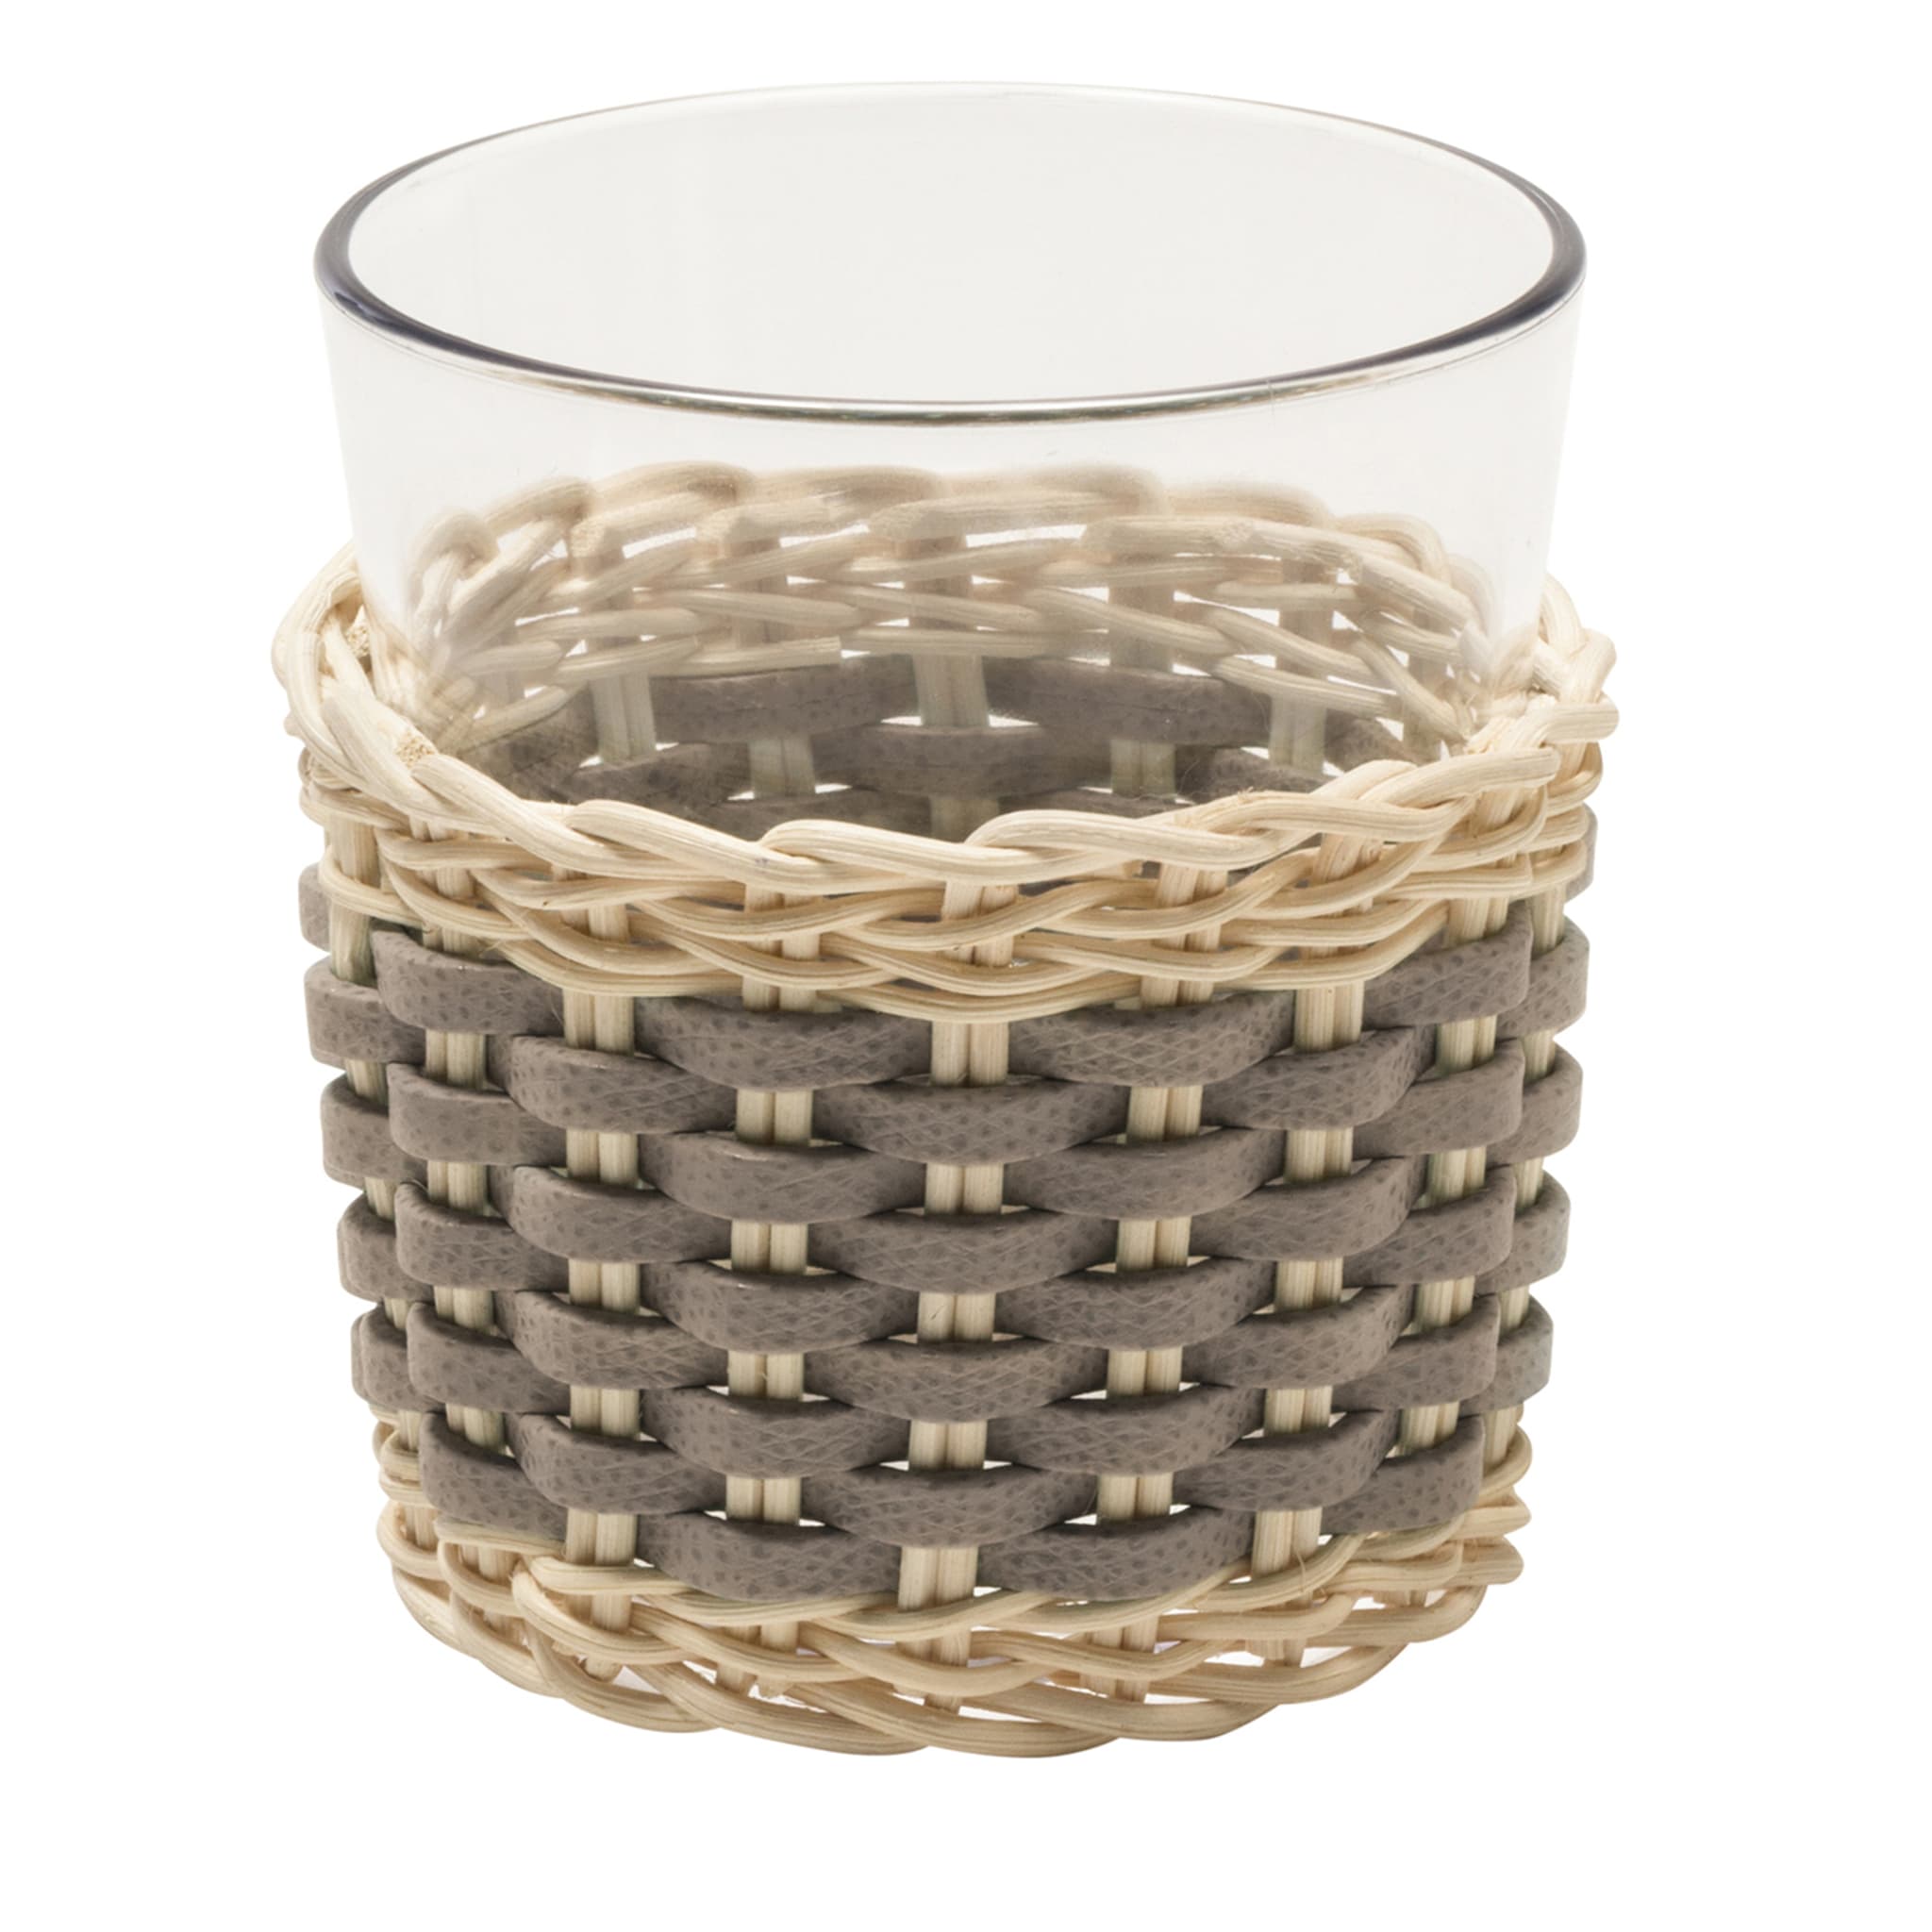 Anney Leather & Rattan Cup - Beige - Main view